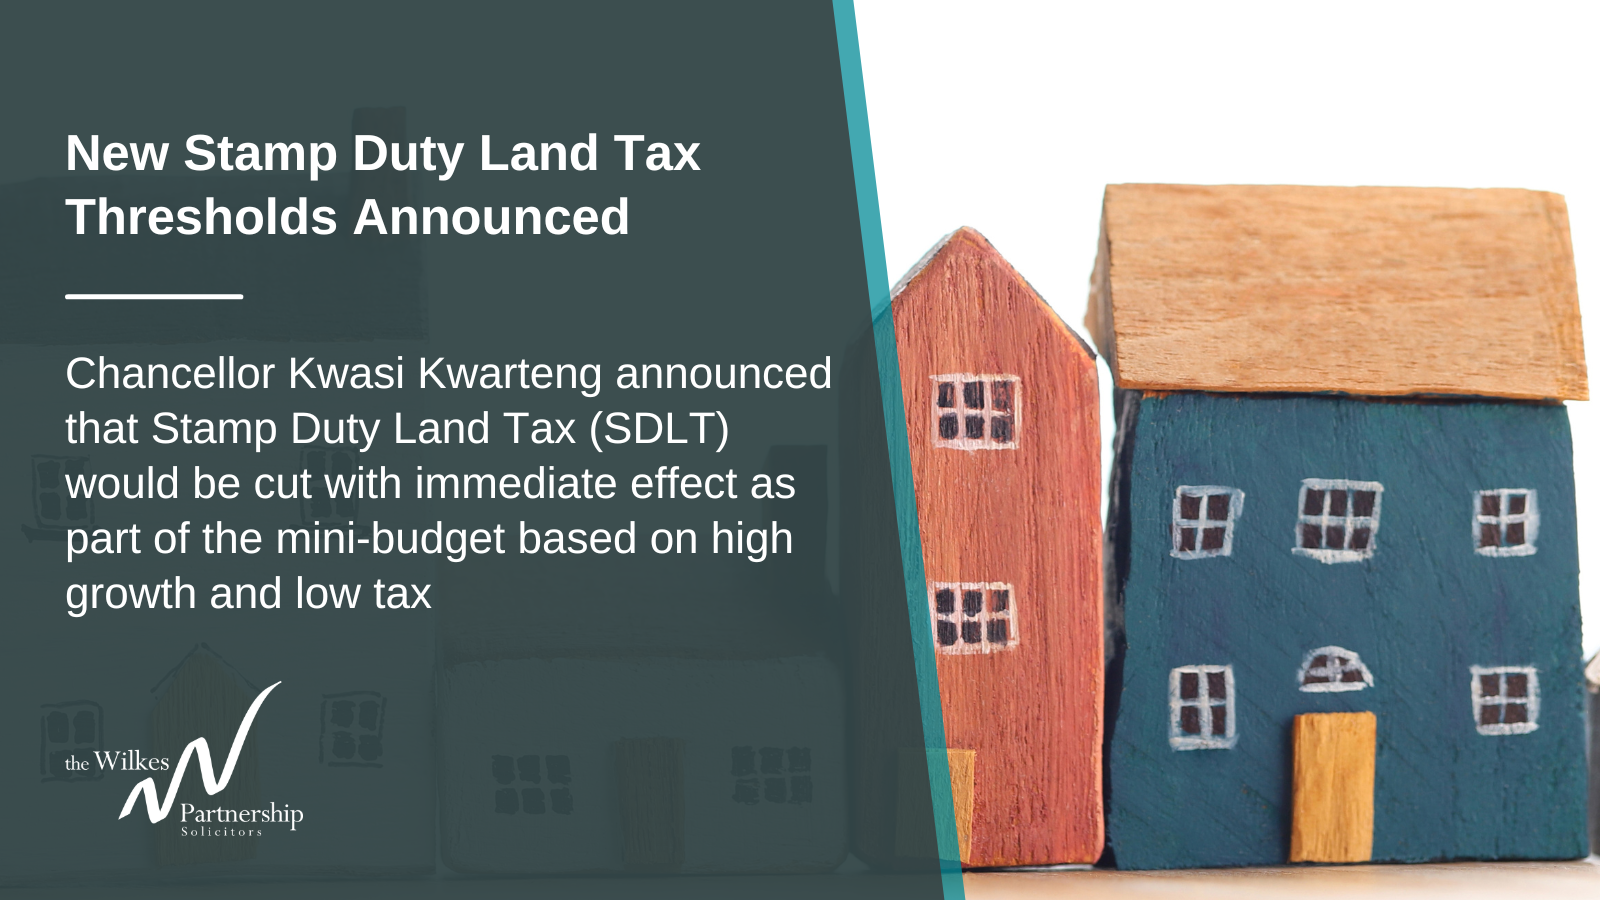 New Stamp Duty Land Tax Thresholds Announced